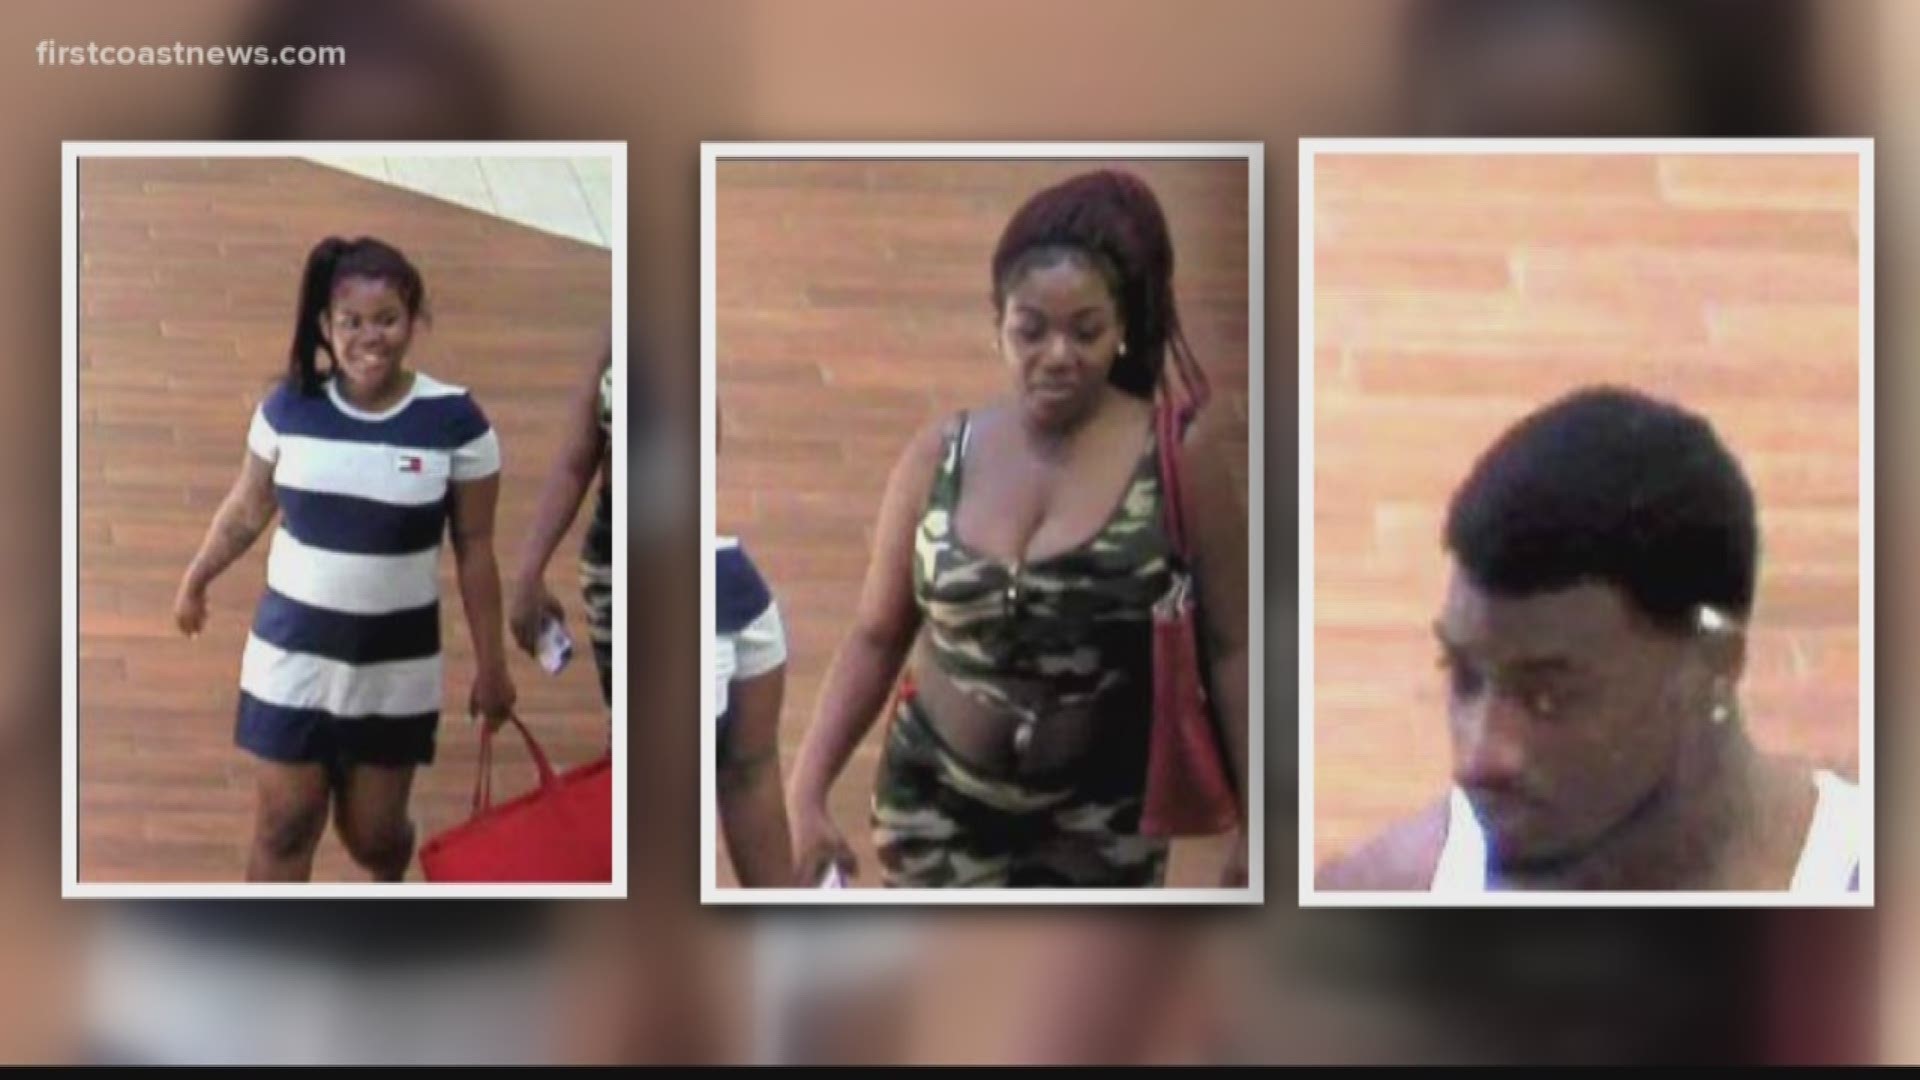 SJSO says these three individuals walked into Kate Spade in St. Augustine Outlet Mall and took more than $2,500 worth of purses before running out of the store.